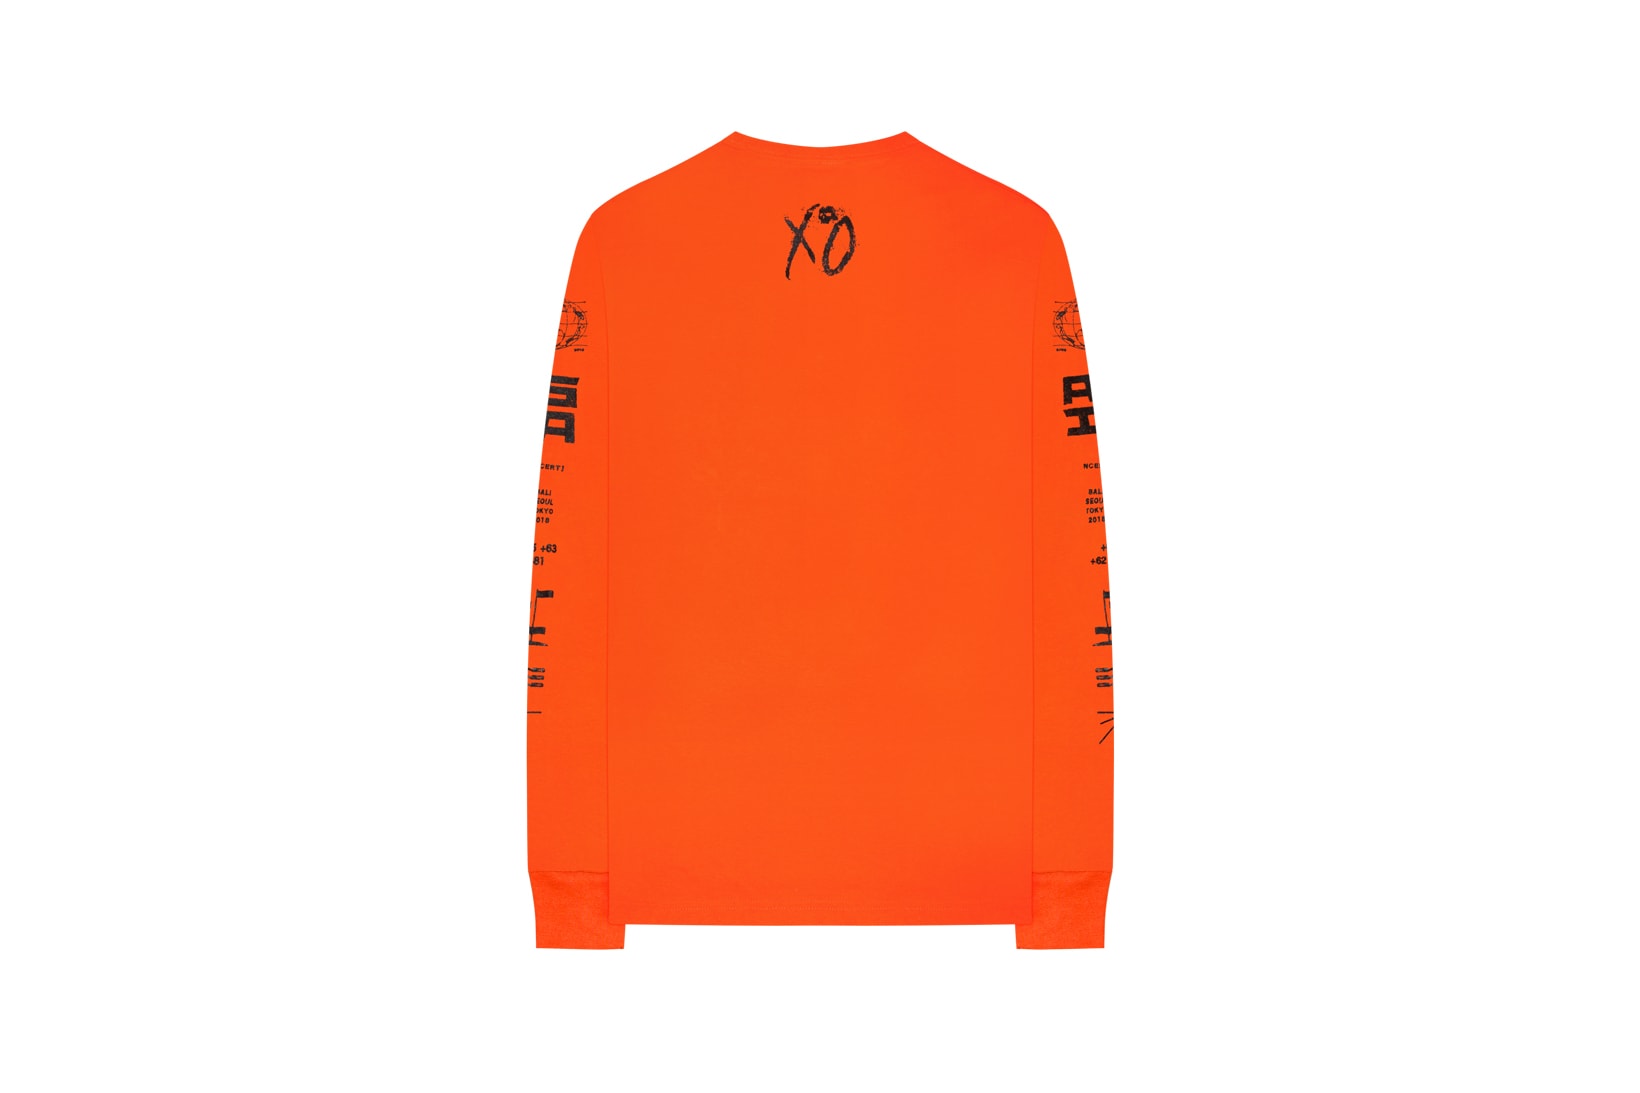 The Weeknd Asia Tour Merch Collection Long Sleeved Shirt Orange